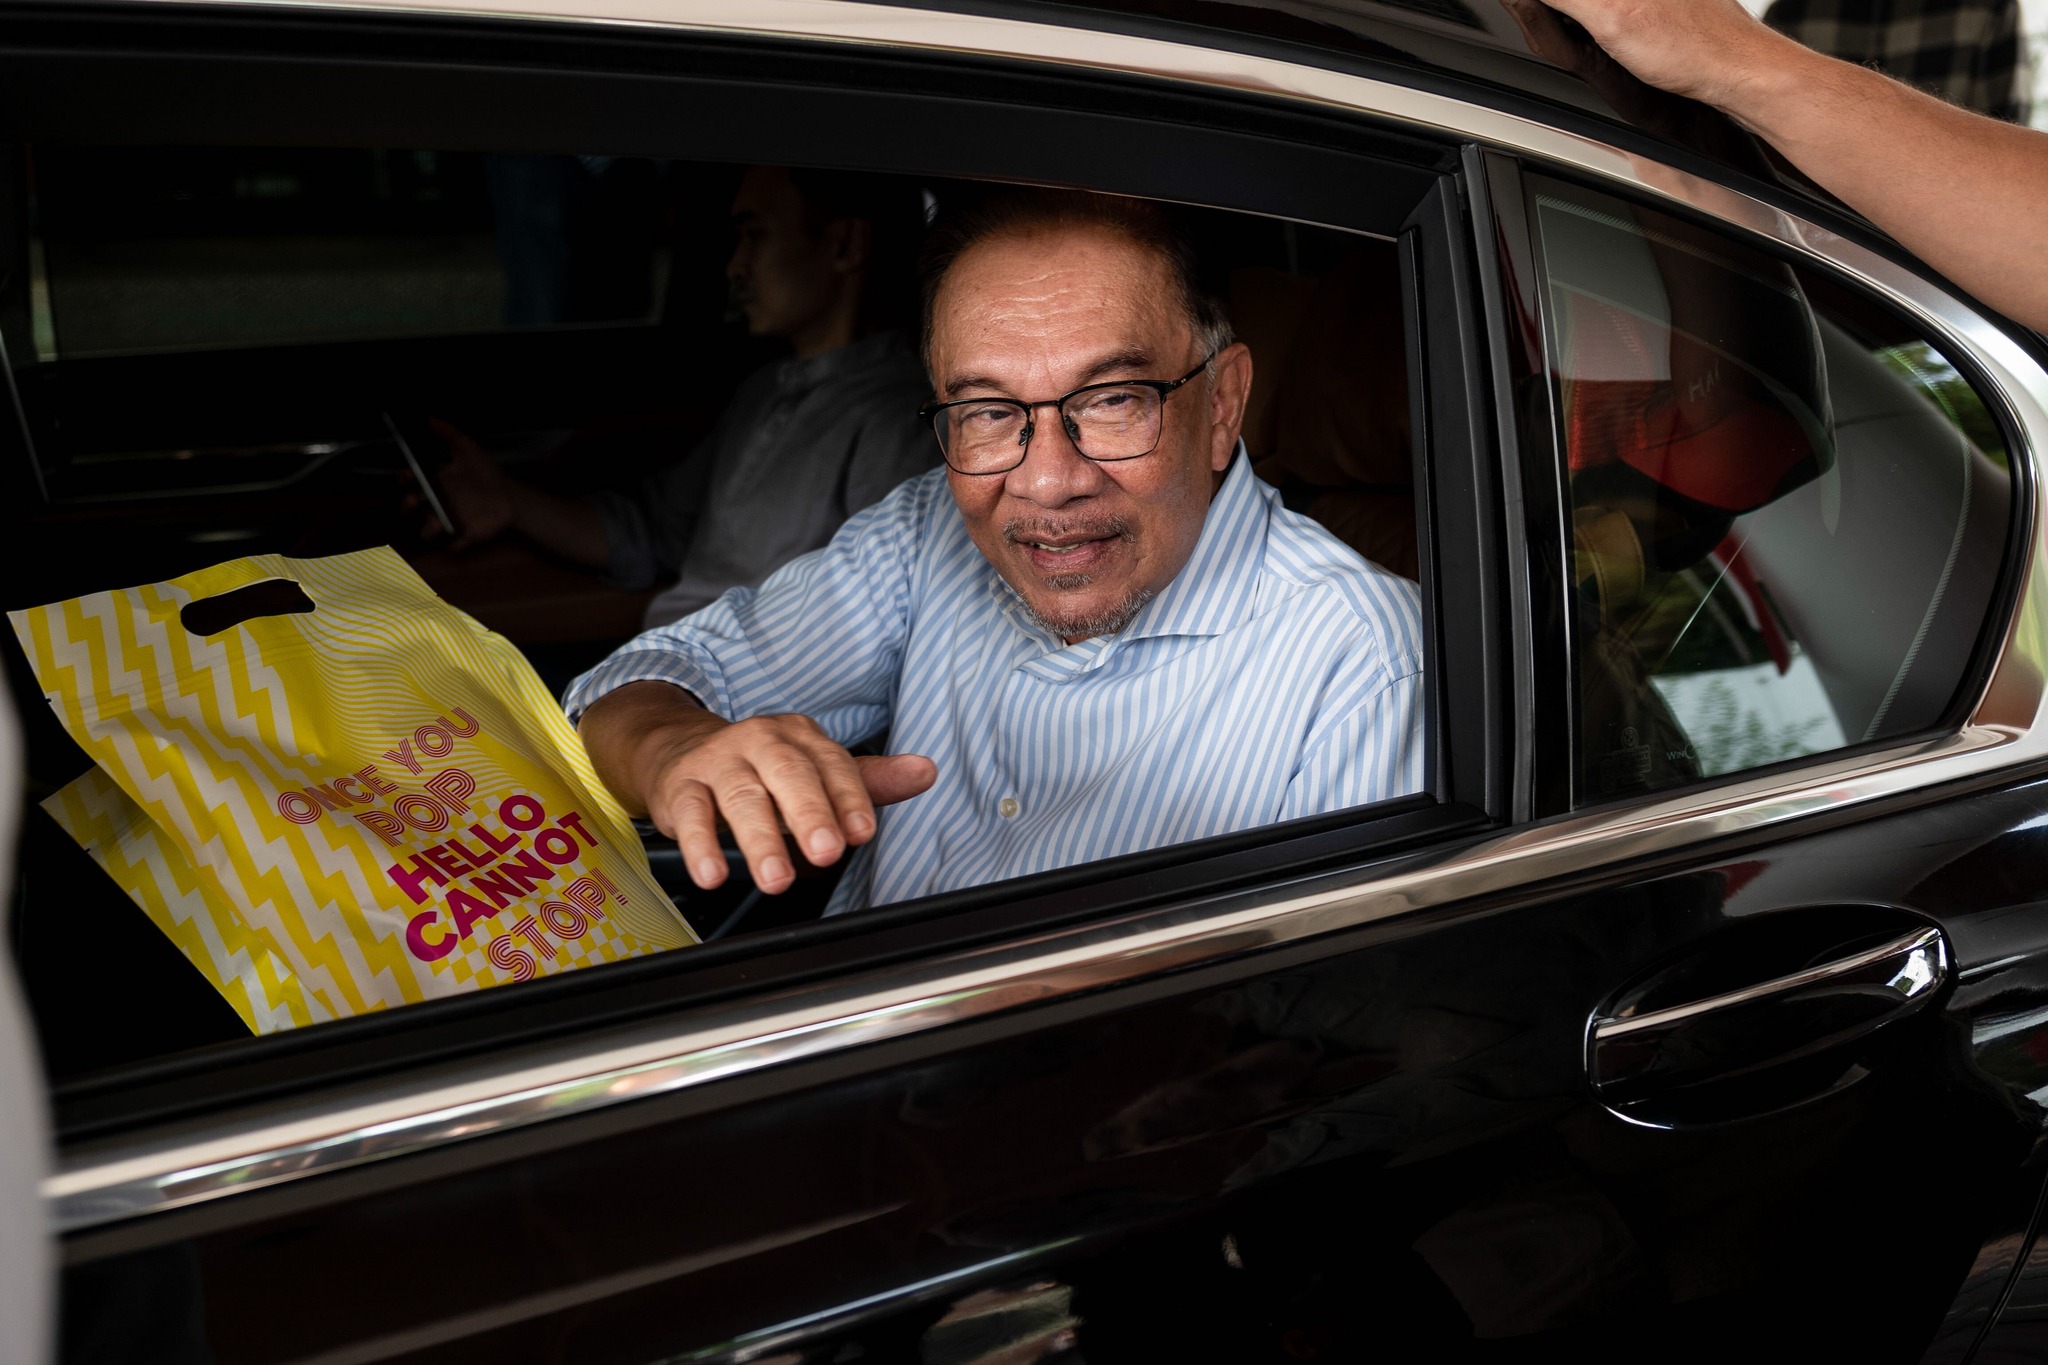 Anwar Ibrahim hands out GSC popcorn to members of the press as he leaves his office. Image credit: CNA